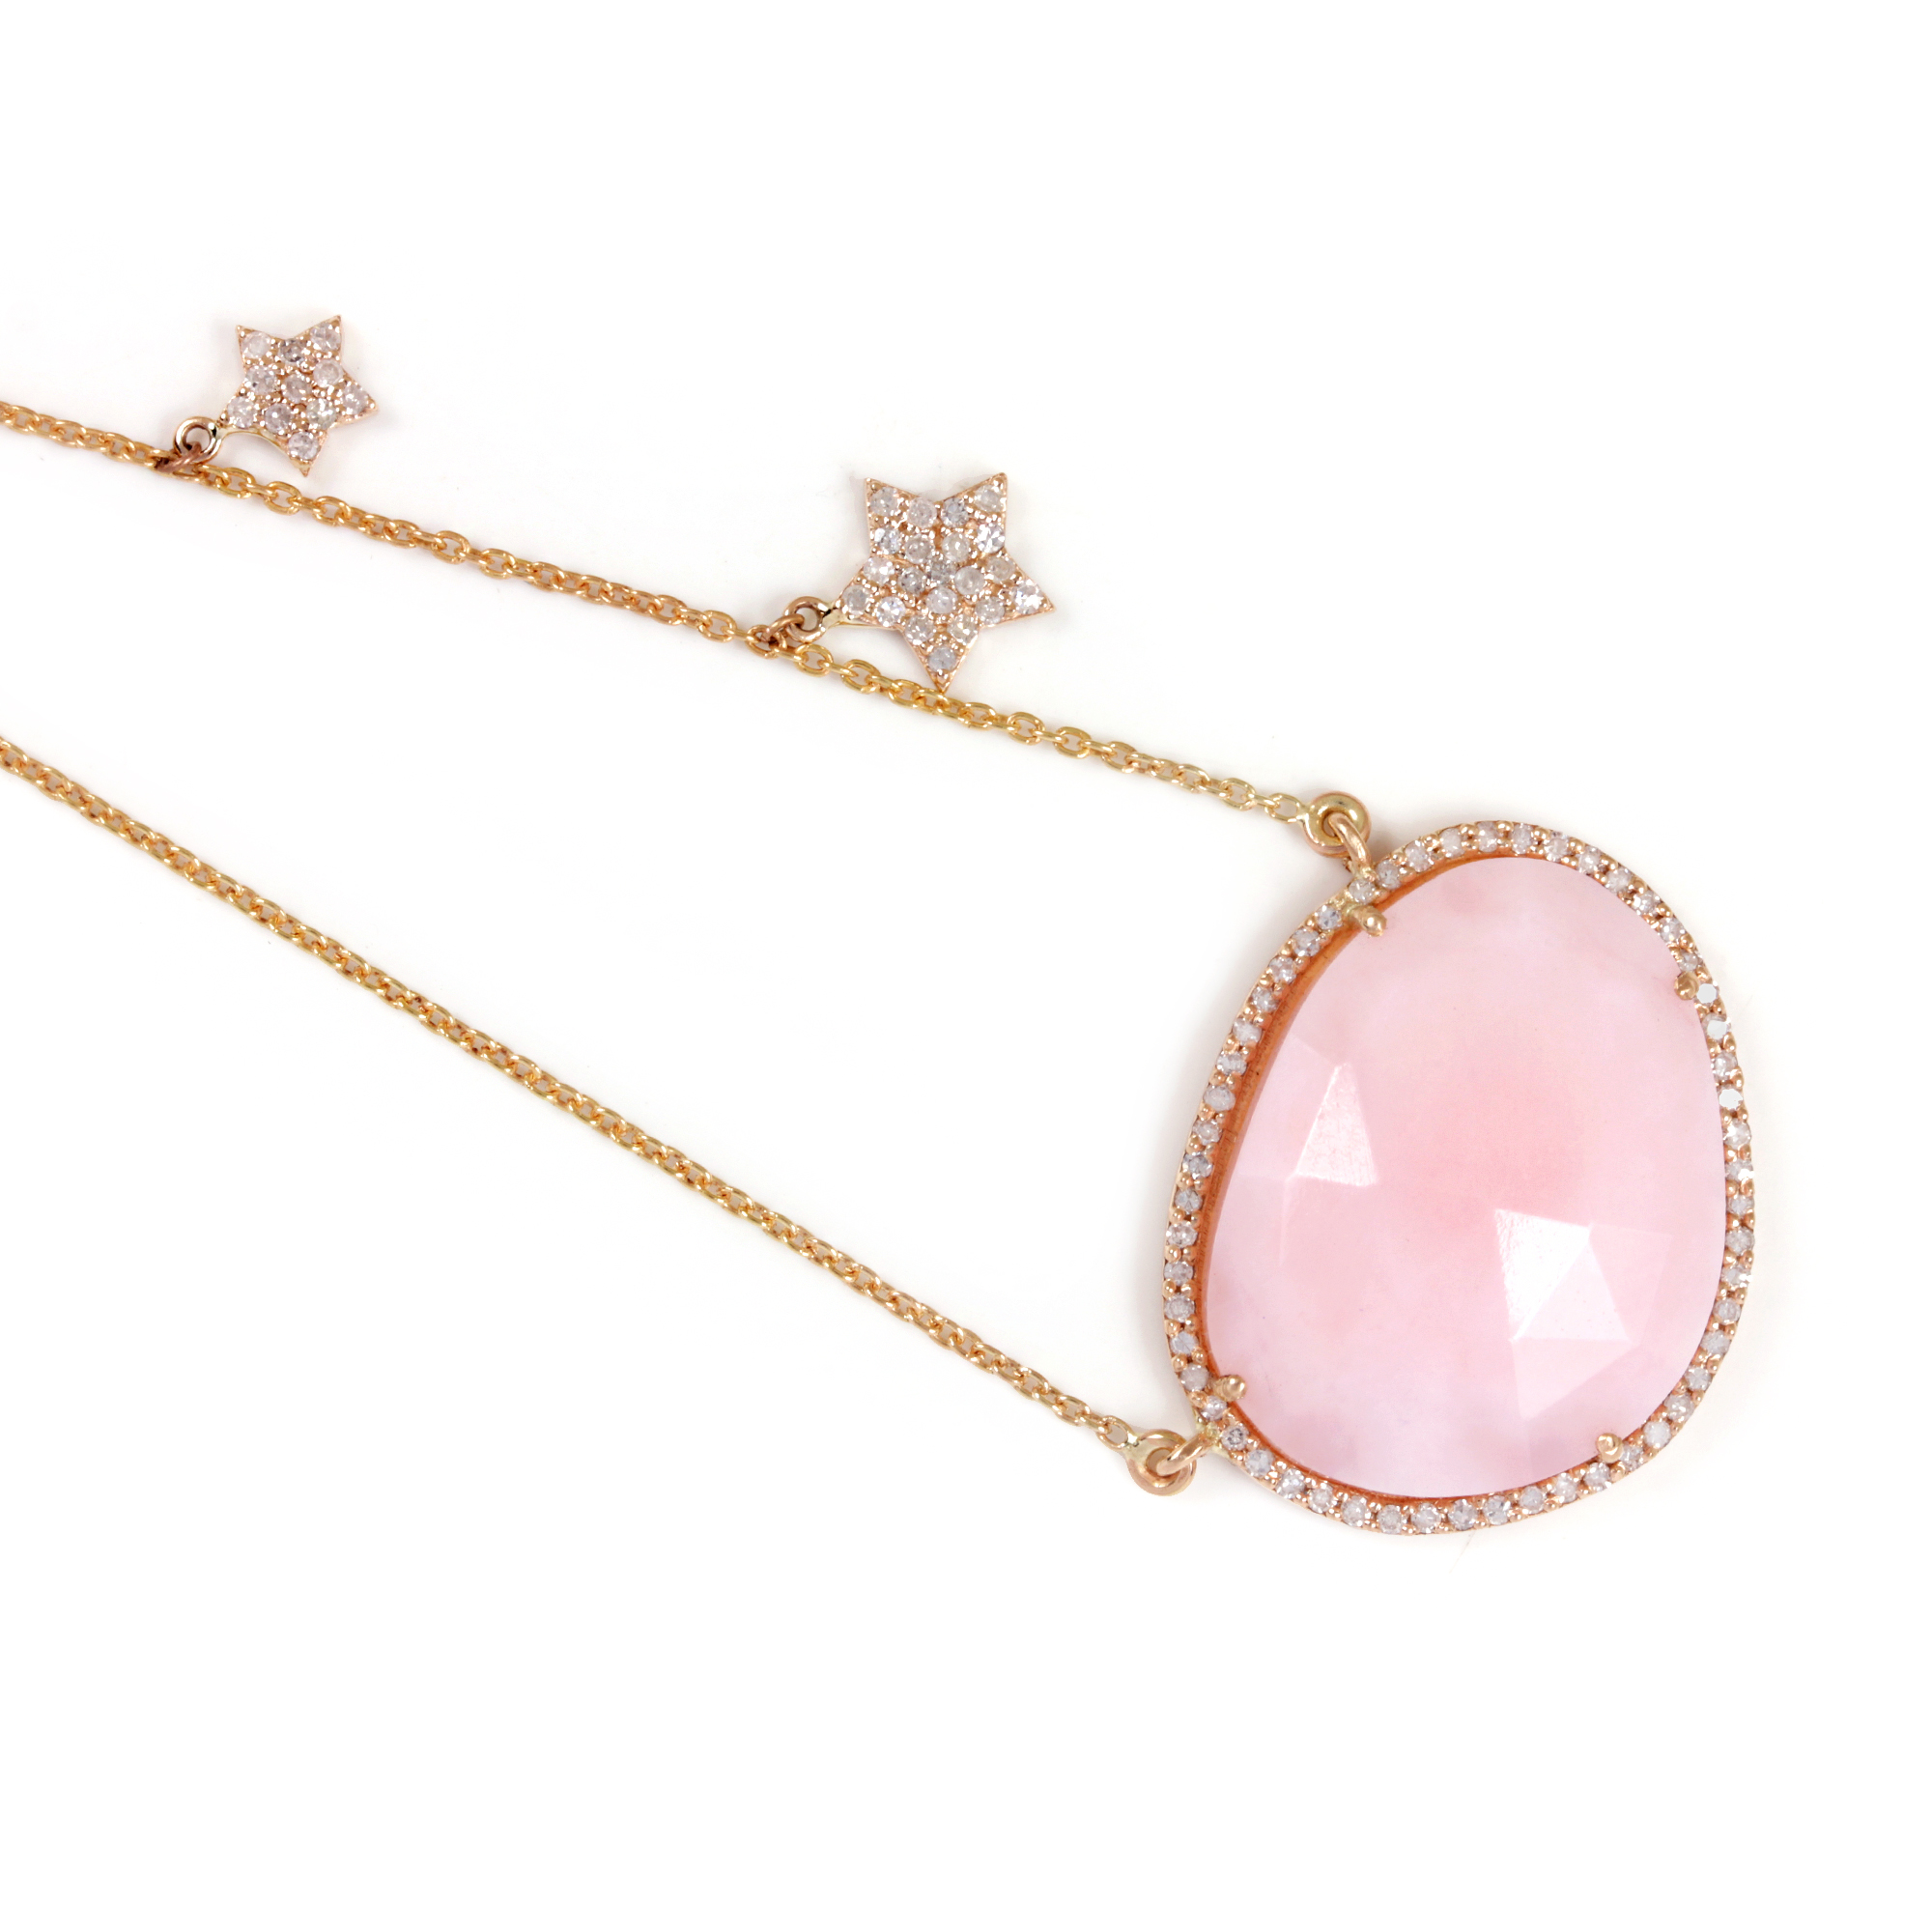 Pink Opal Pave Diamond Pendant Necklace 14K Solid Gold Chain Jewelry